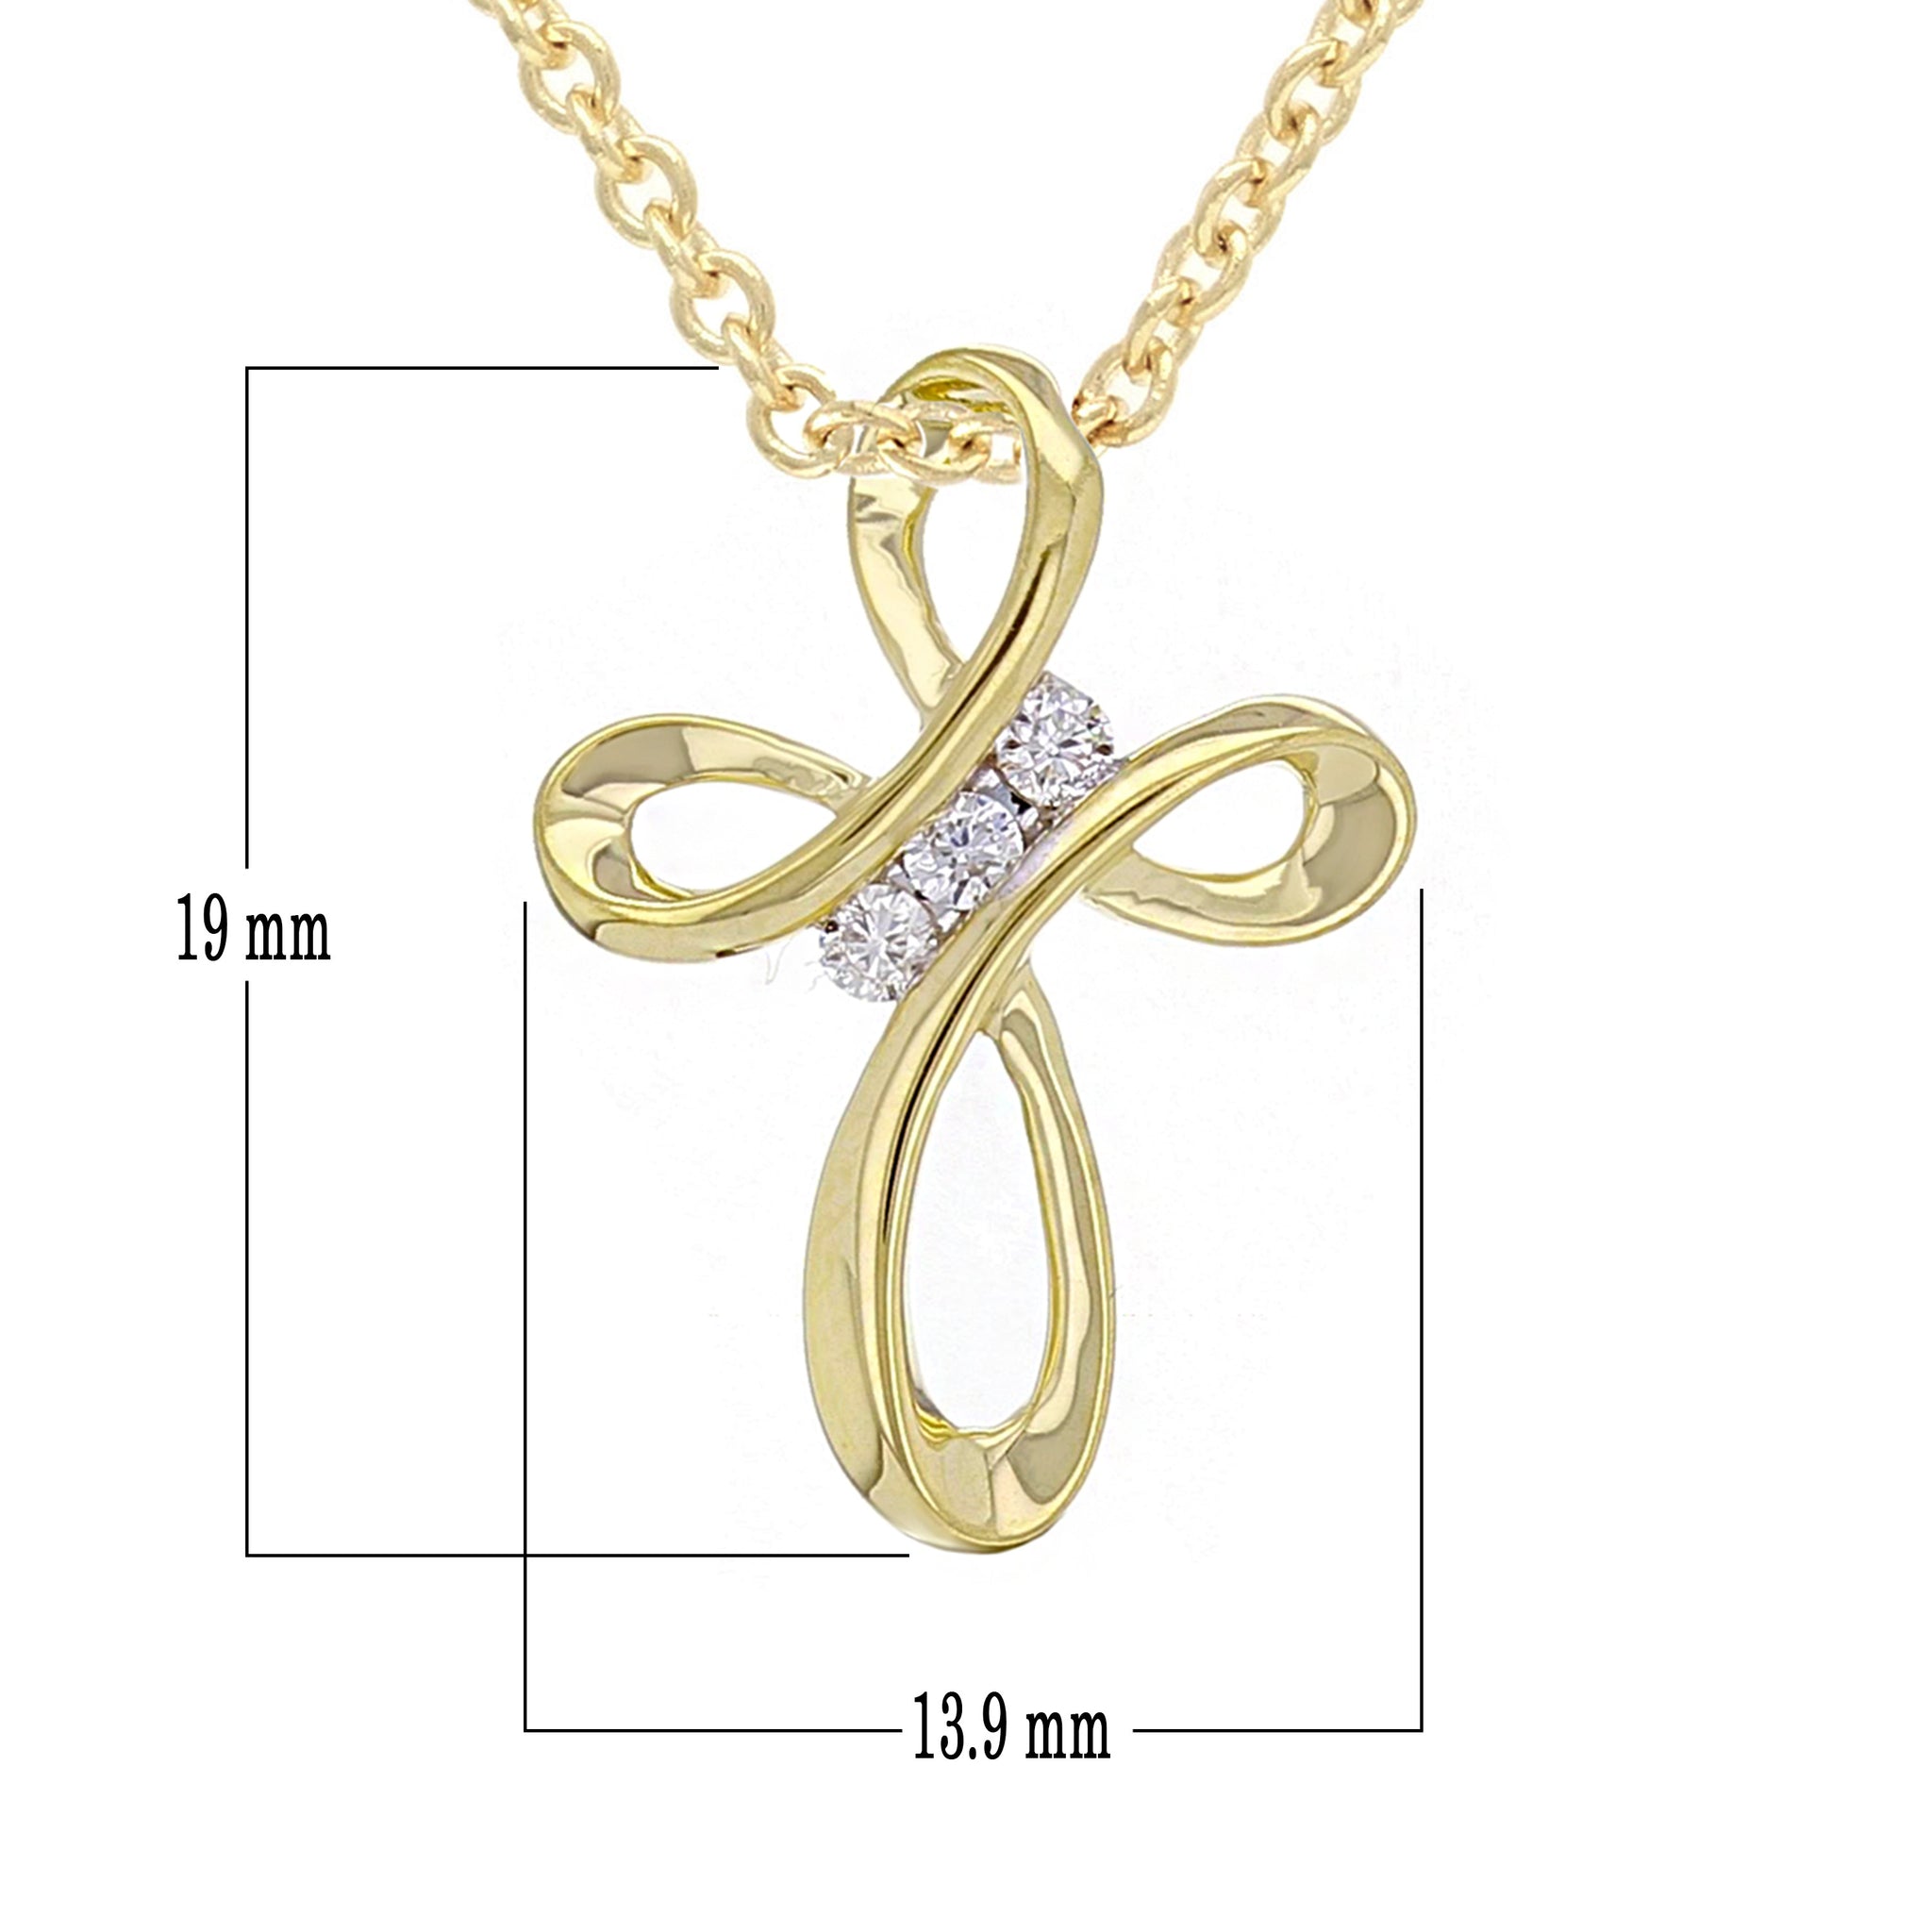 Buy 925 Sterling Silver Infinity Cross Necklace For Women - Modern Cross  And Infinity Necklace - Infinity Love Cross Pendant In 3 Color Styles -  Religious Jewelry with Adjustable Chain - Top Gifting Idea at Amazon.in